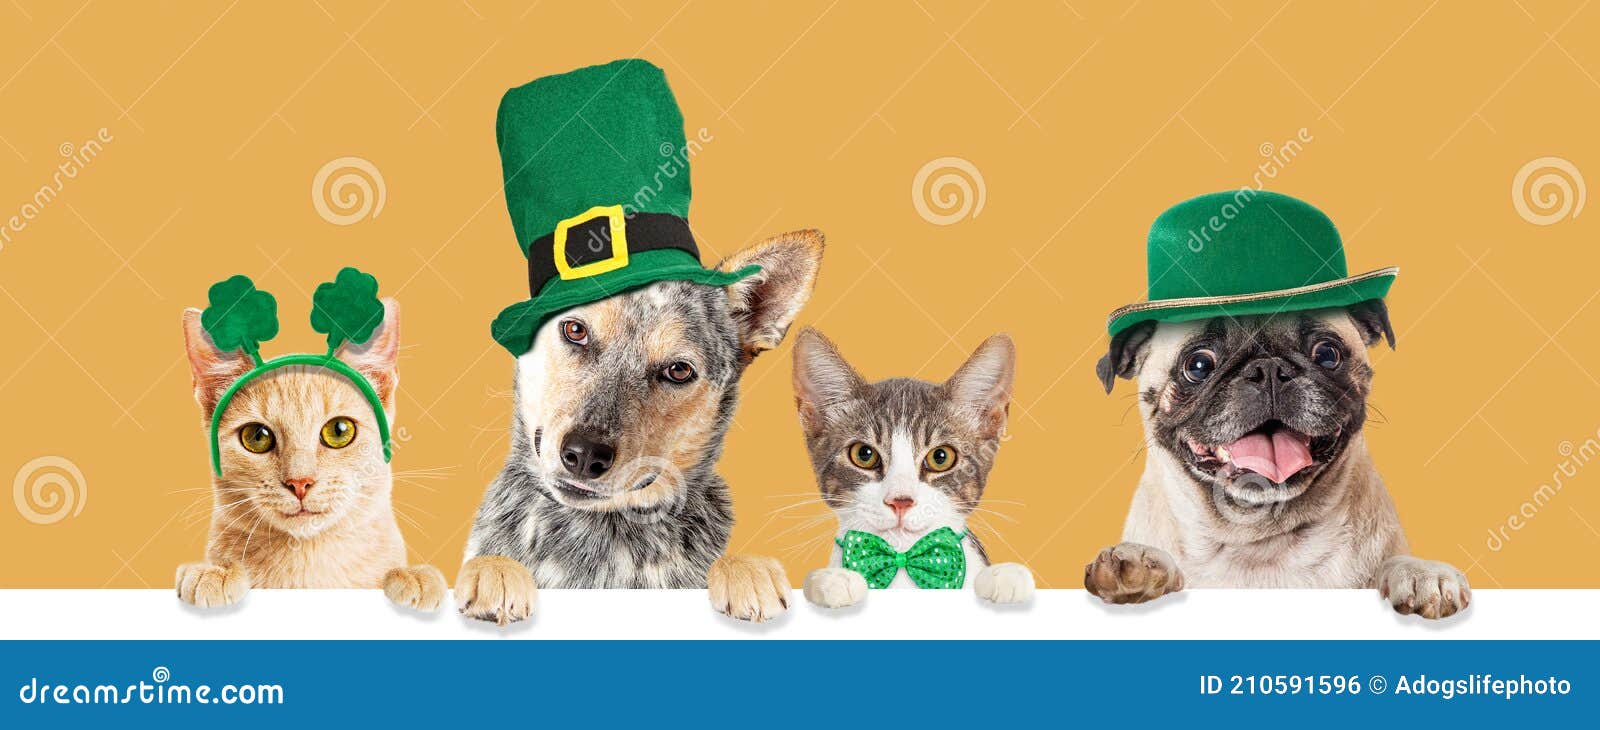 St Patricks Day Cats and Dogs Over Banner